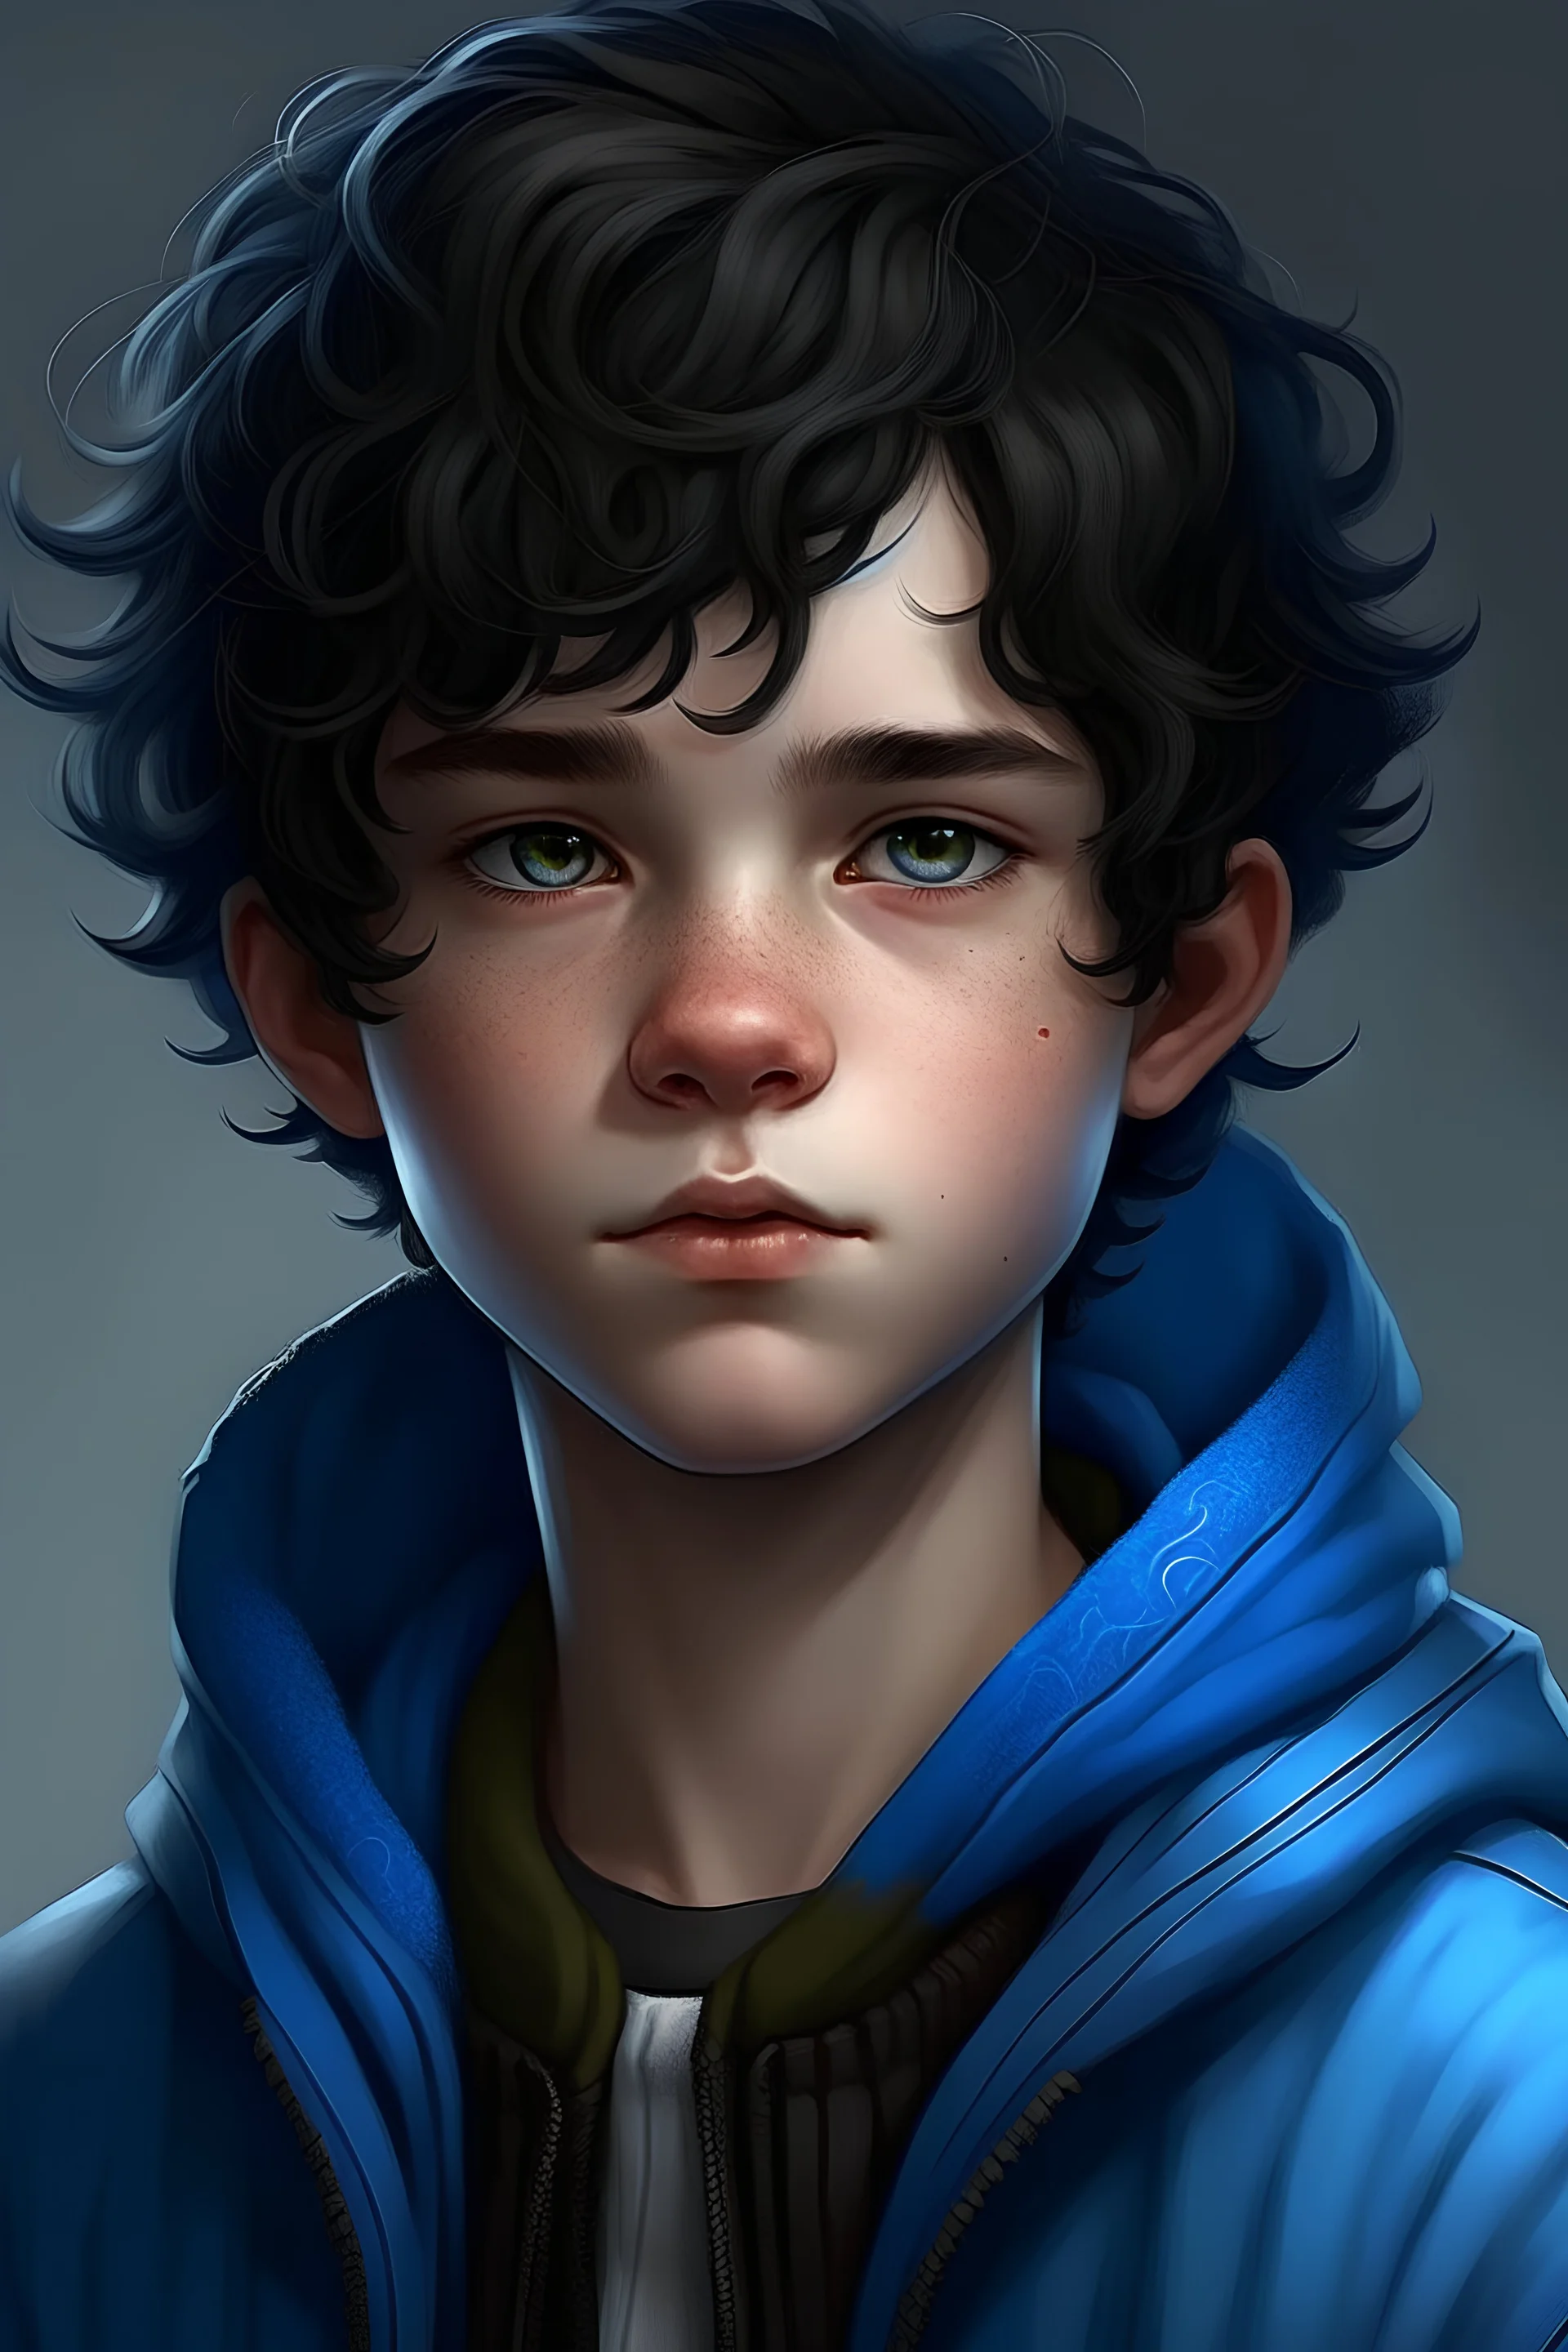 a 14 year old boy, white skin, short curly black hair, blue eyes, well built face, in a blue jacket, realistic epic fantasy style